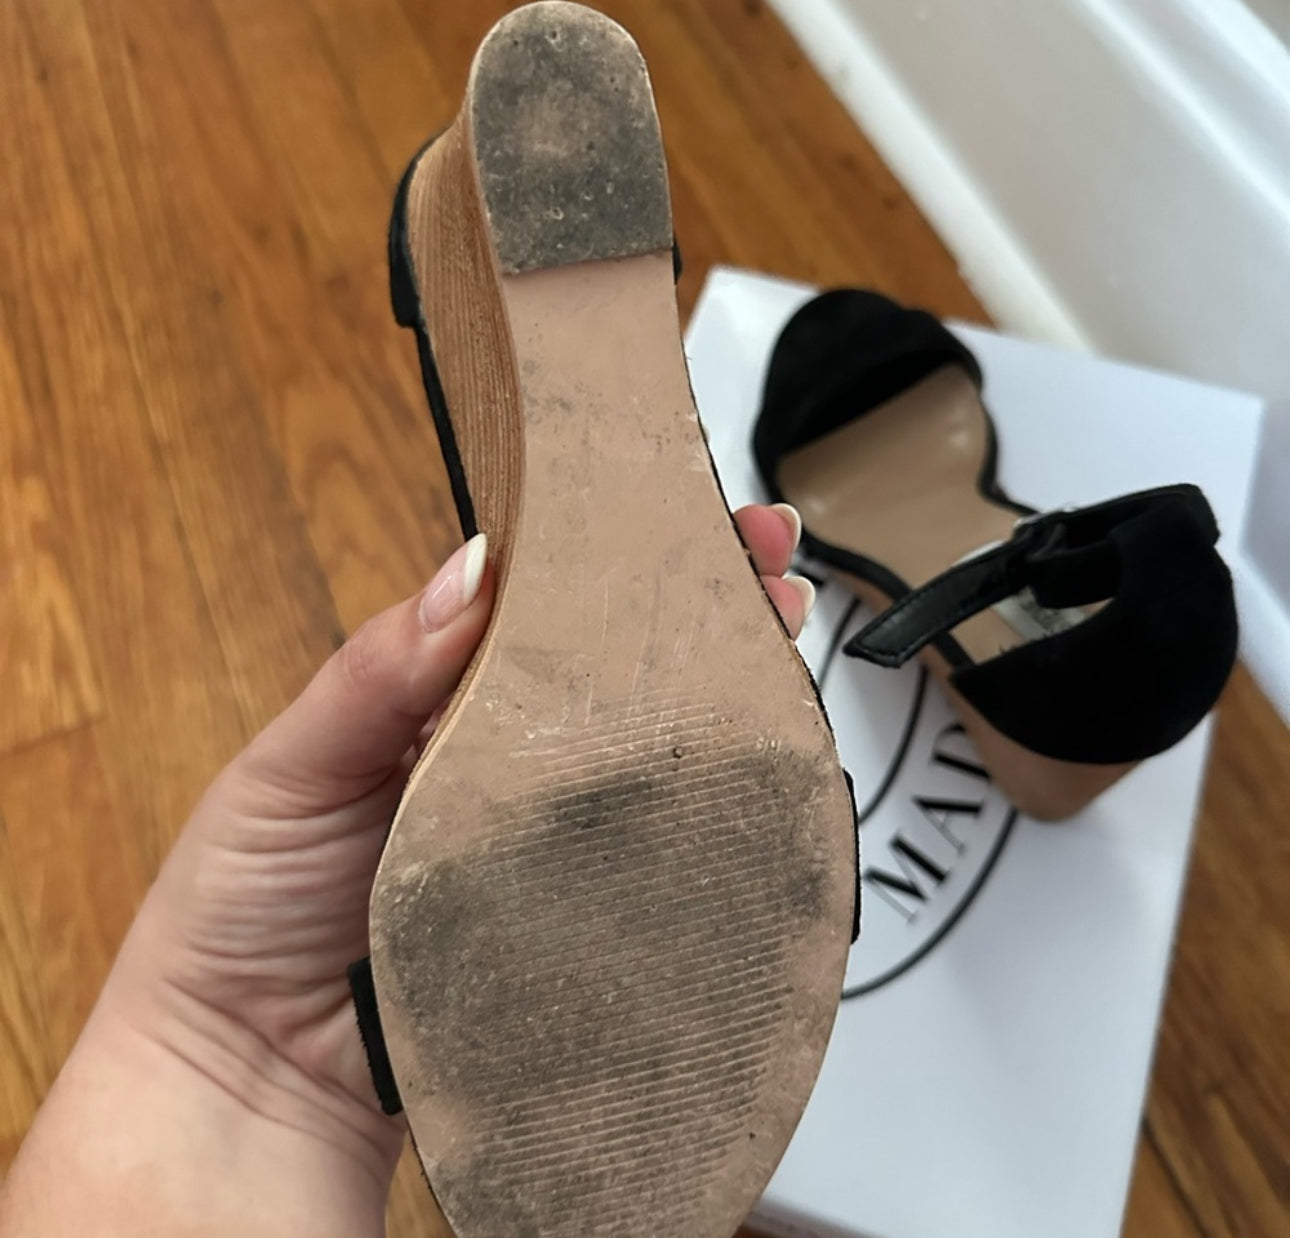 Steve Madden Mary Sandals Size 7